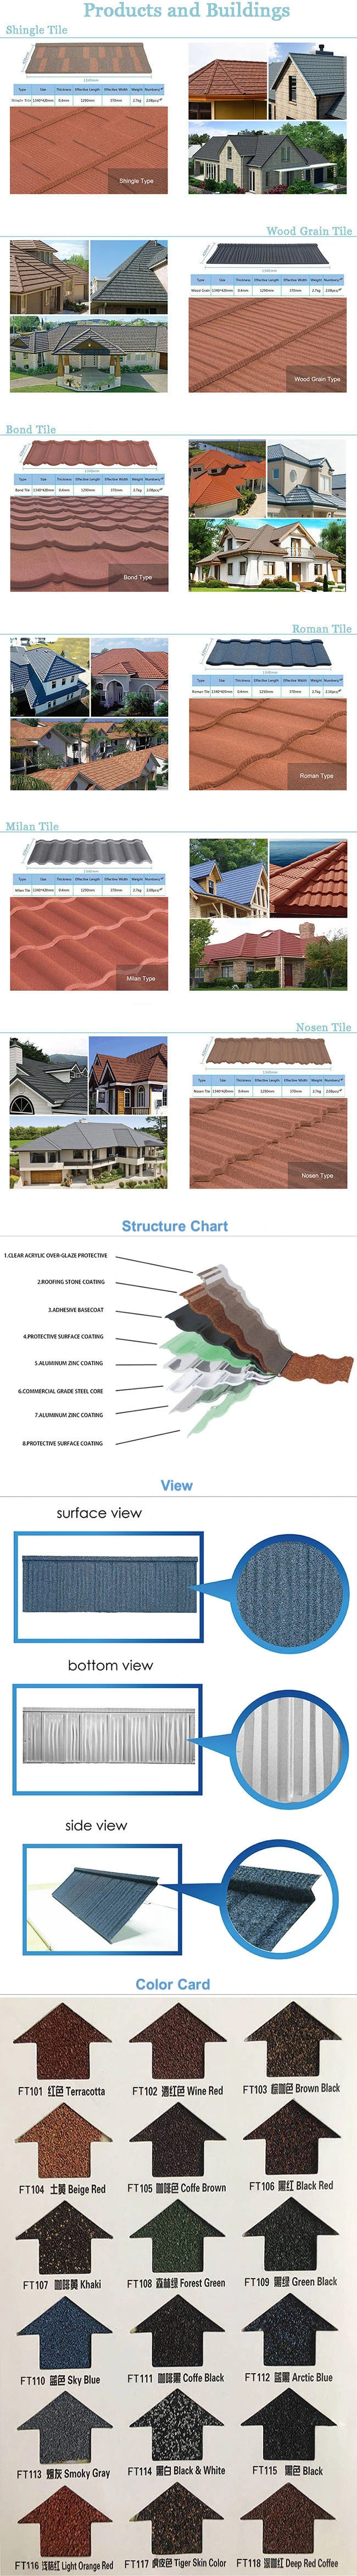 Building Materials Roofing Sheet Roofing Materials Stone Tile Roof Tile